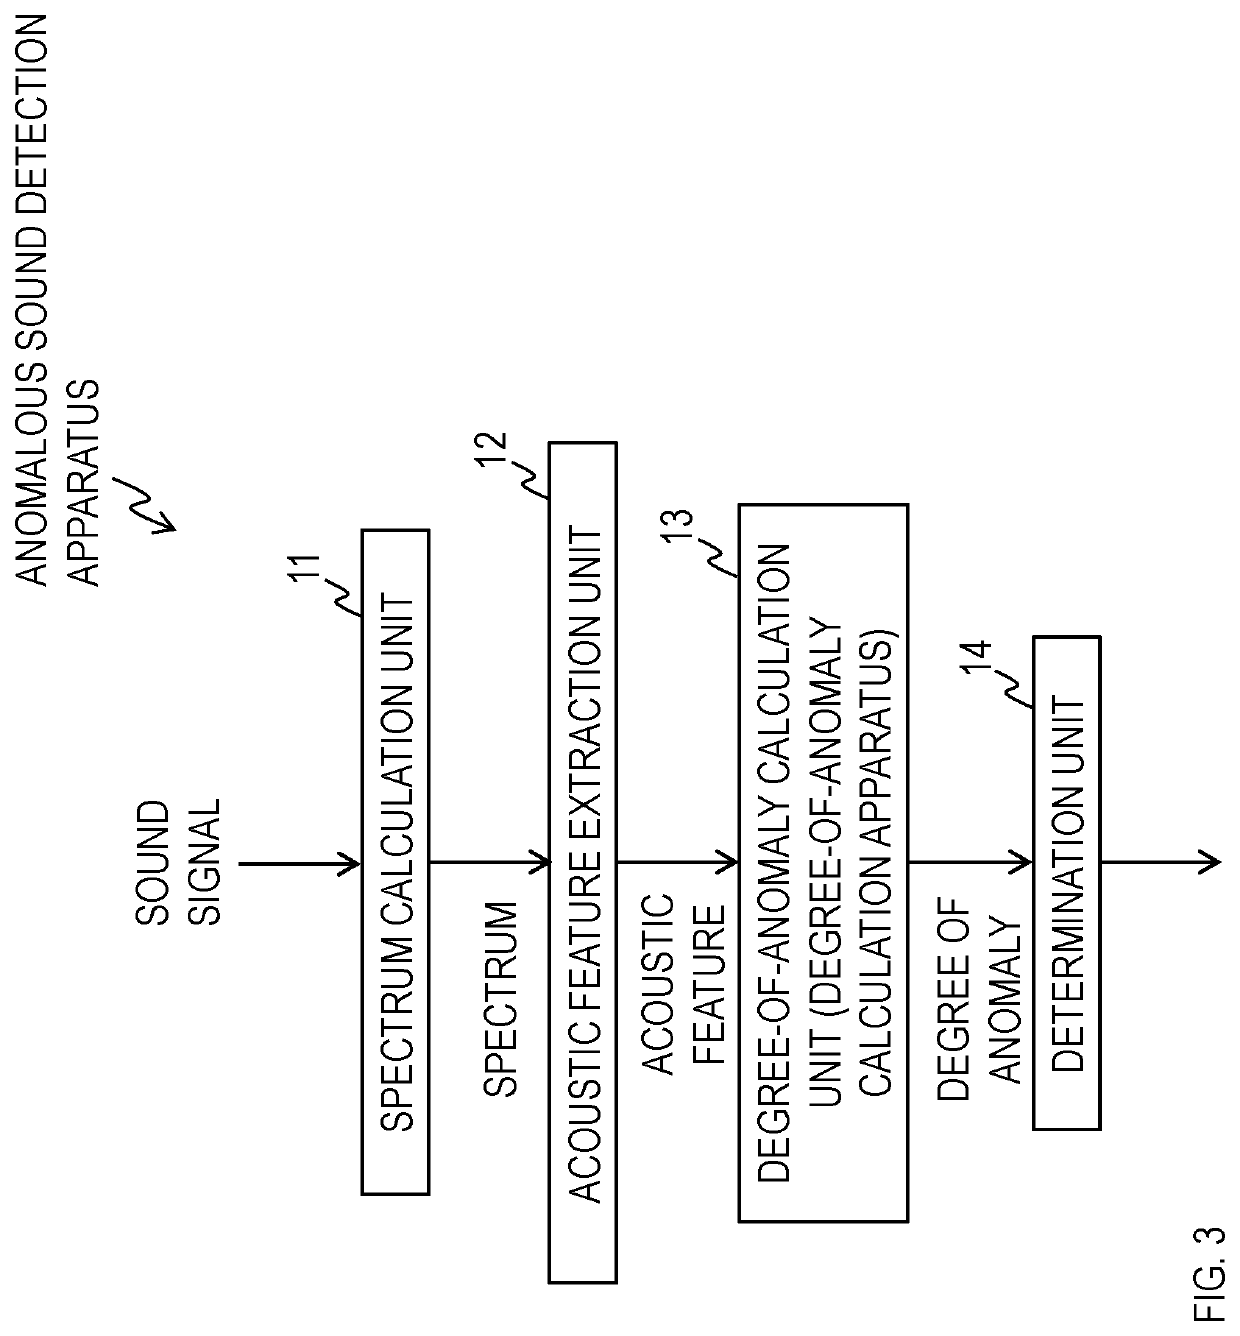 Anomalous sound detection apparatus, degree-of-anomaly calculation apparatus, anomalous sound generation apparatus, anomalous sound detection training apparatus, anomalous signal detection apparatus, anomalous signal detection training apparatus, and methods and programs therefor